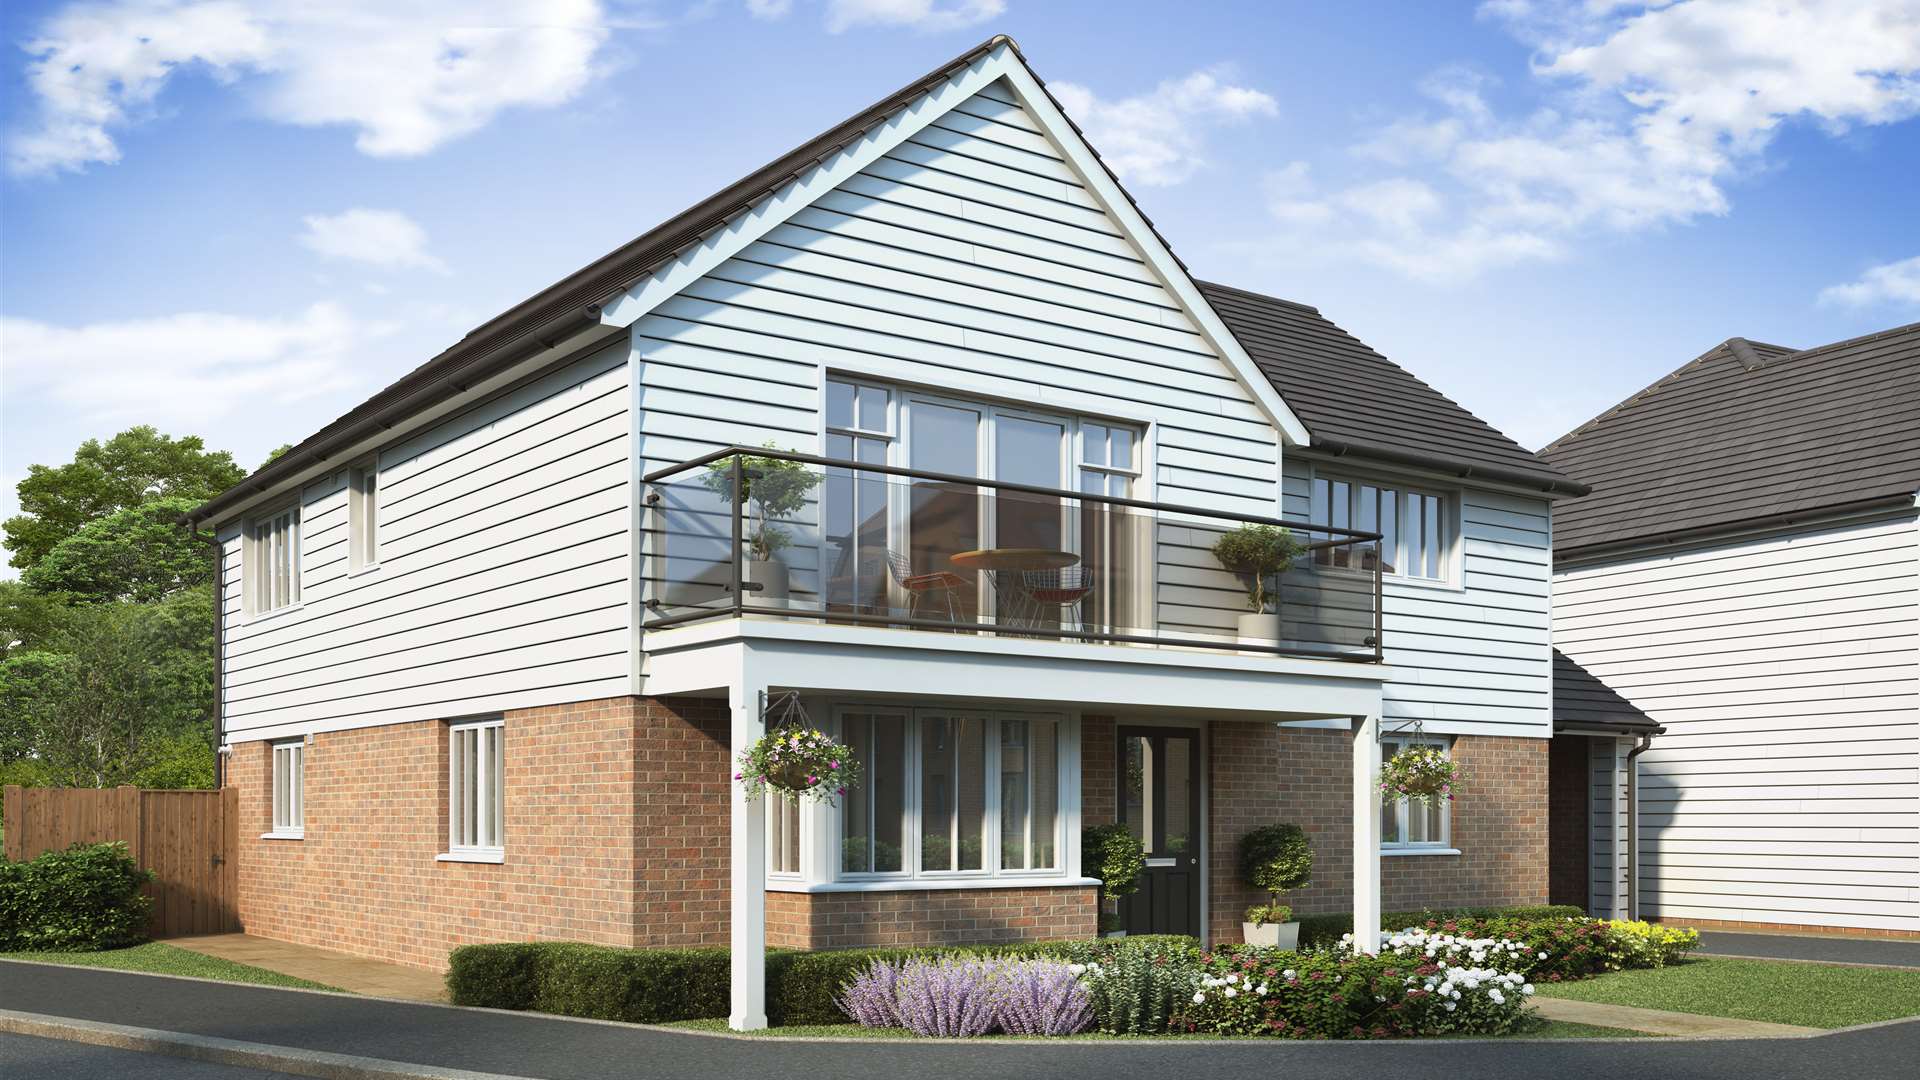 One of the new homes at the Martello Lakes development in Hythe